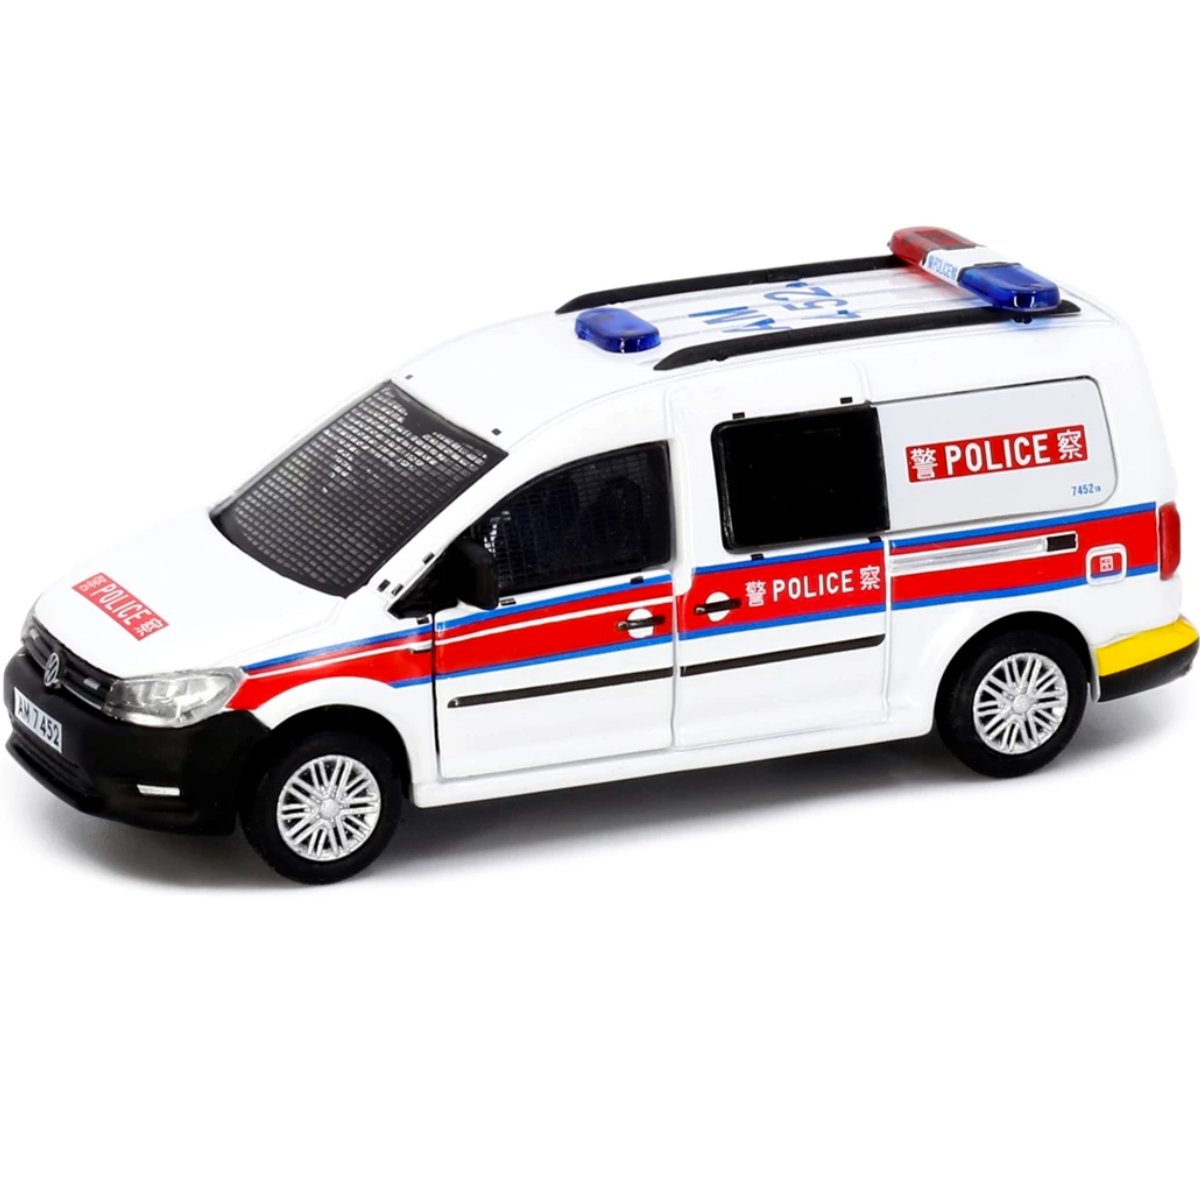 Tiny Models Volkswagen Caddy Hong Kong Police AM7452 (1:64 Scale) - Phillips Hobbies